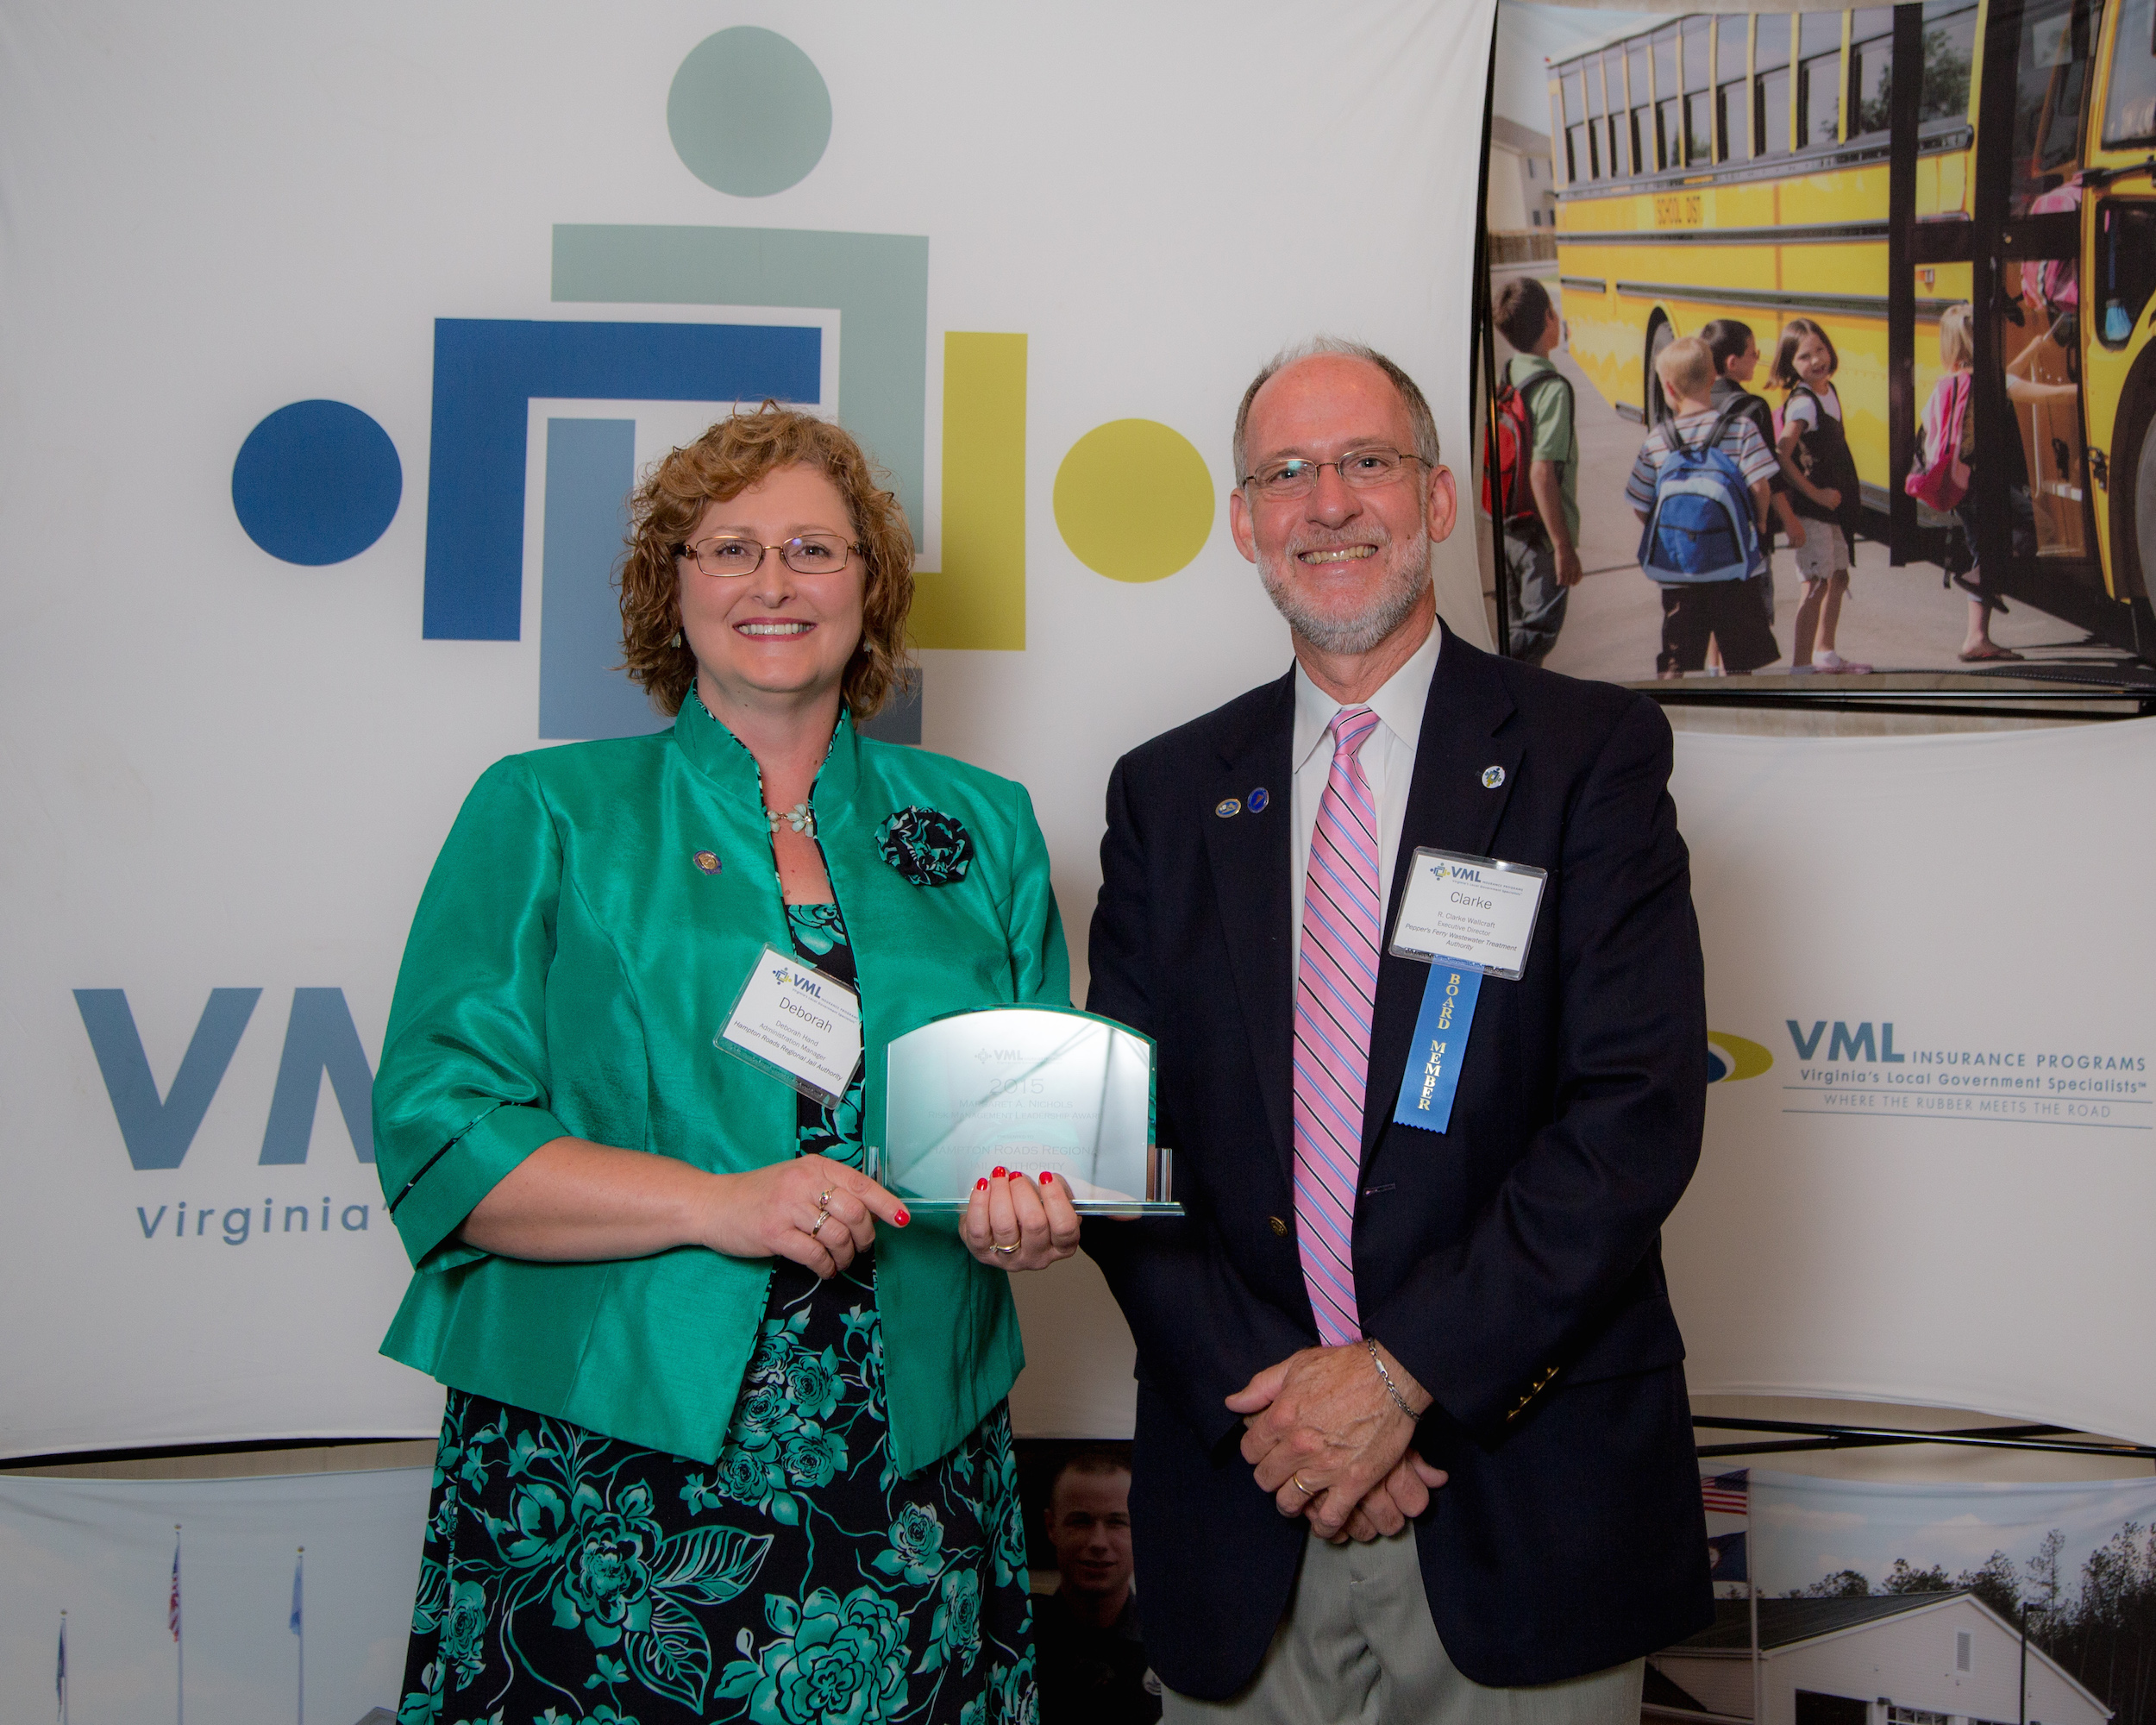 (L to R): Deborah Hand with the Hampton Roads Regional Jail Authority and VMLIP Members’ Supervisory Board Member Clarke Wallcraft.